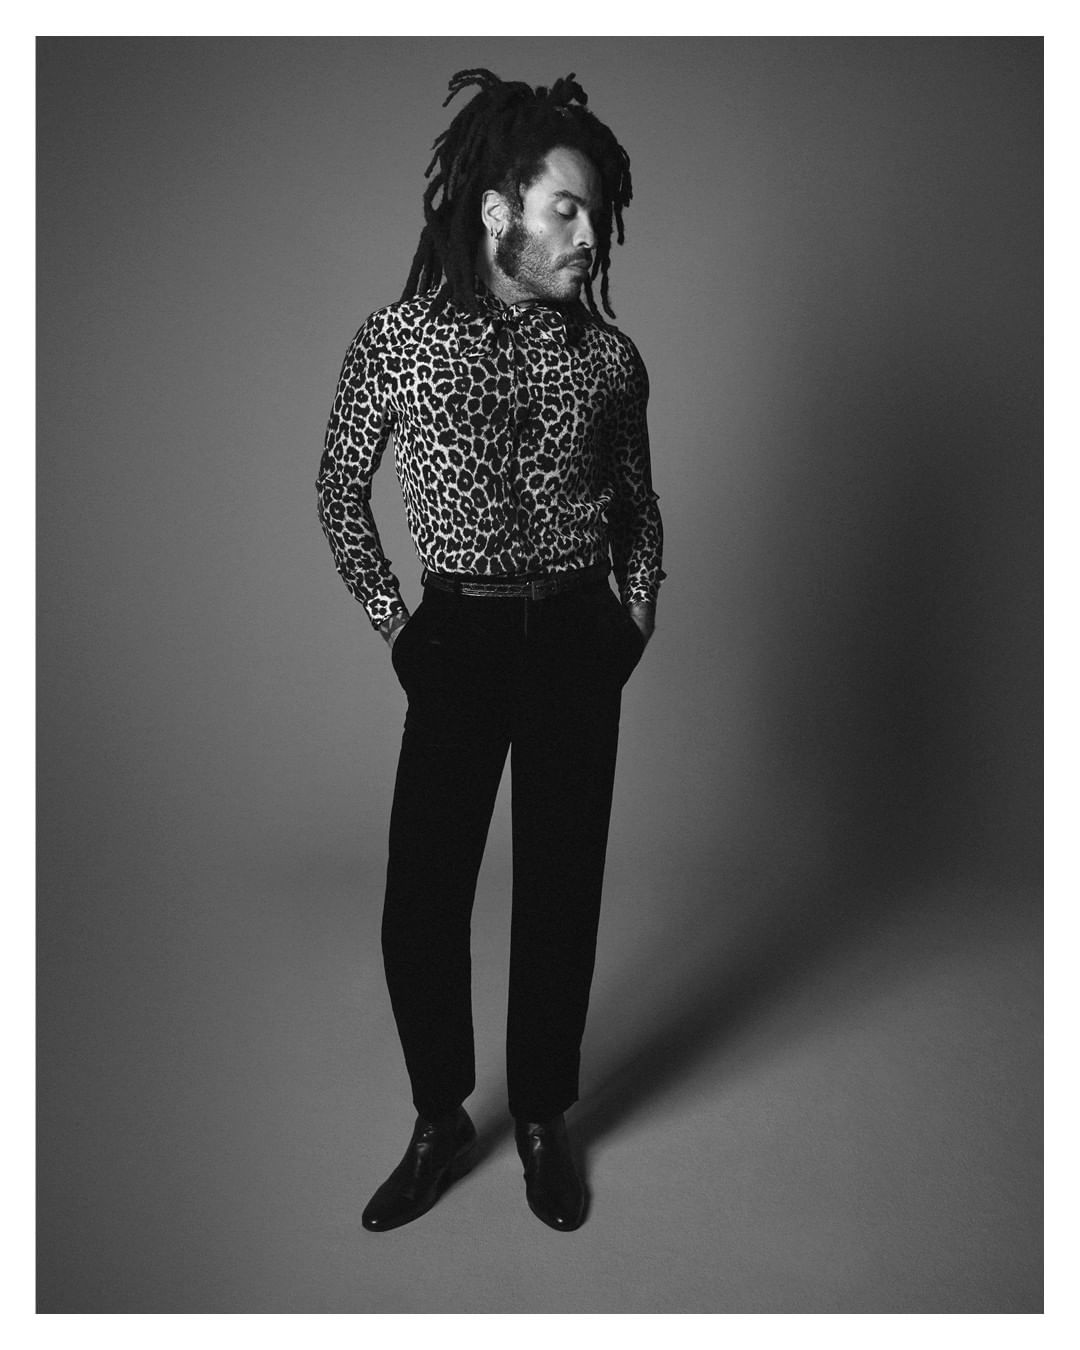 Lenny Kravitz for YSL Fall Winter 20 photographed by David Sims